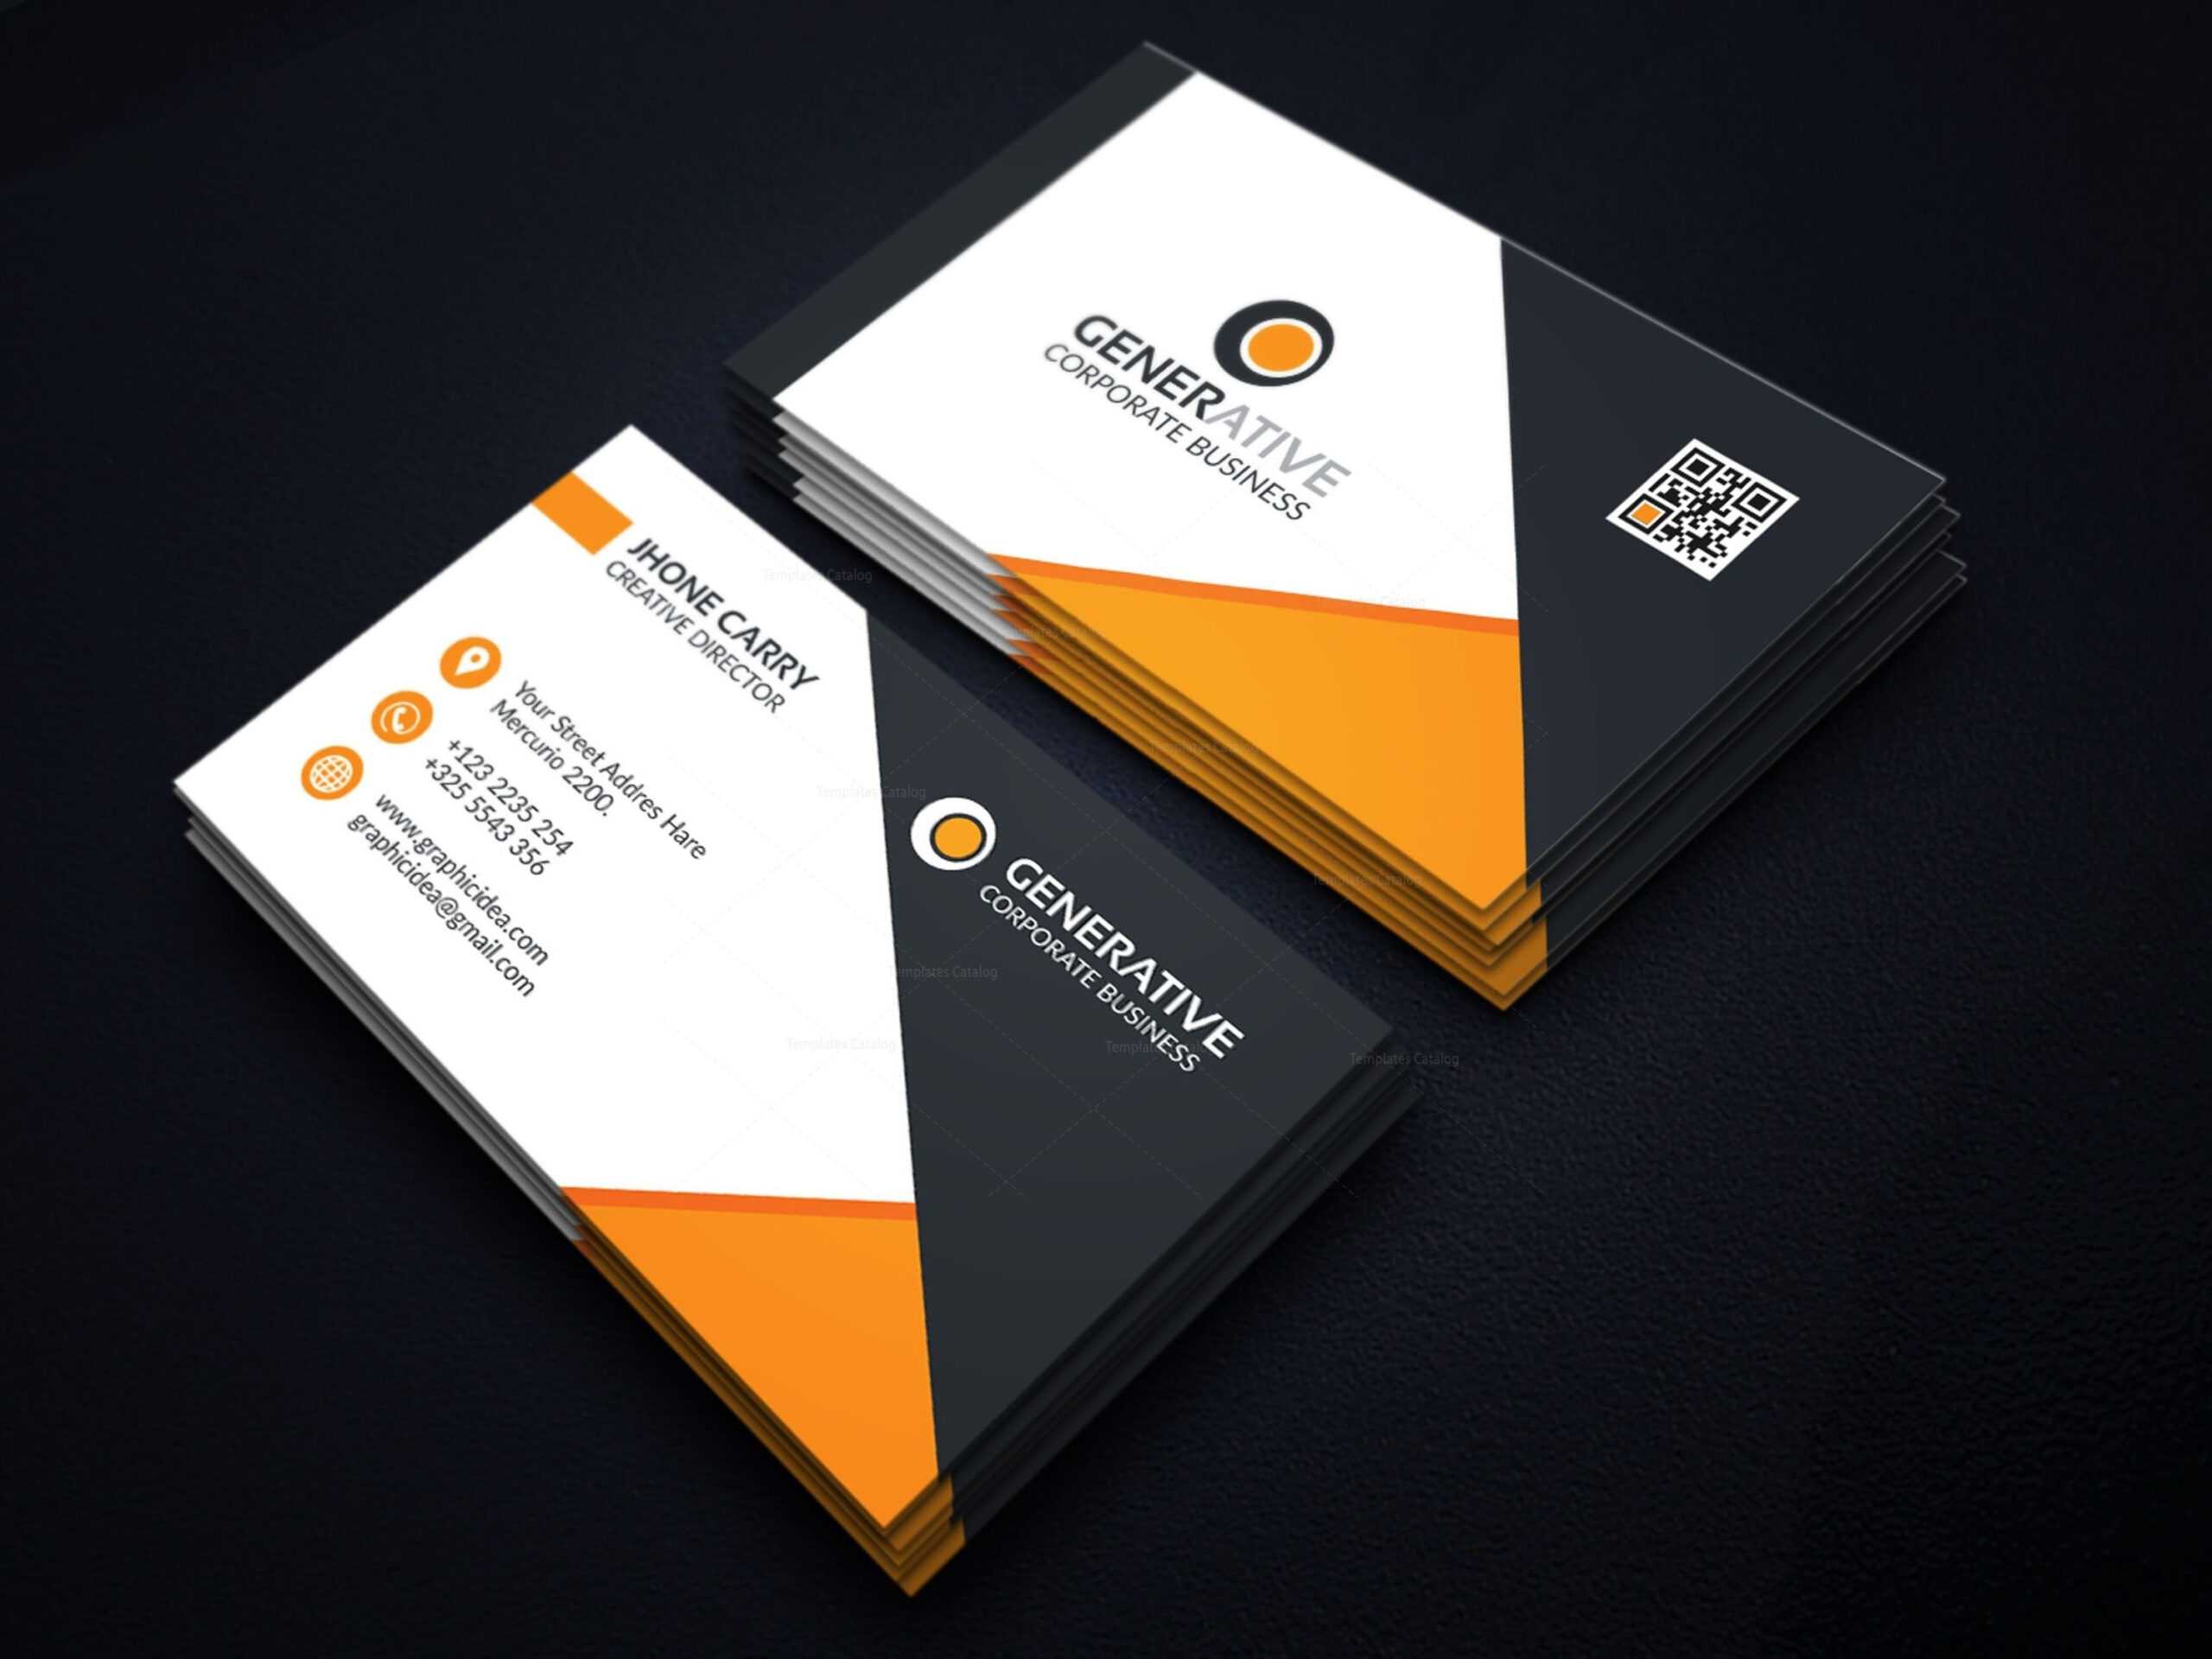 Creative Business Cards Design Clipart Images Gallery For Within Web Design Business Cards Templates